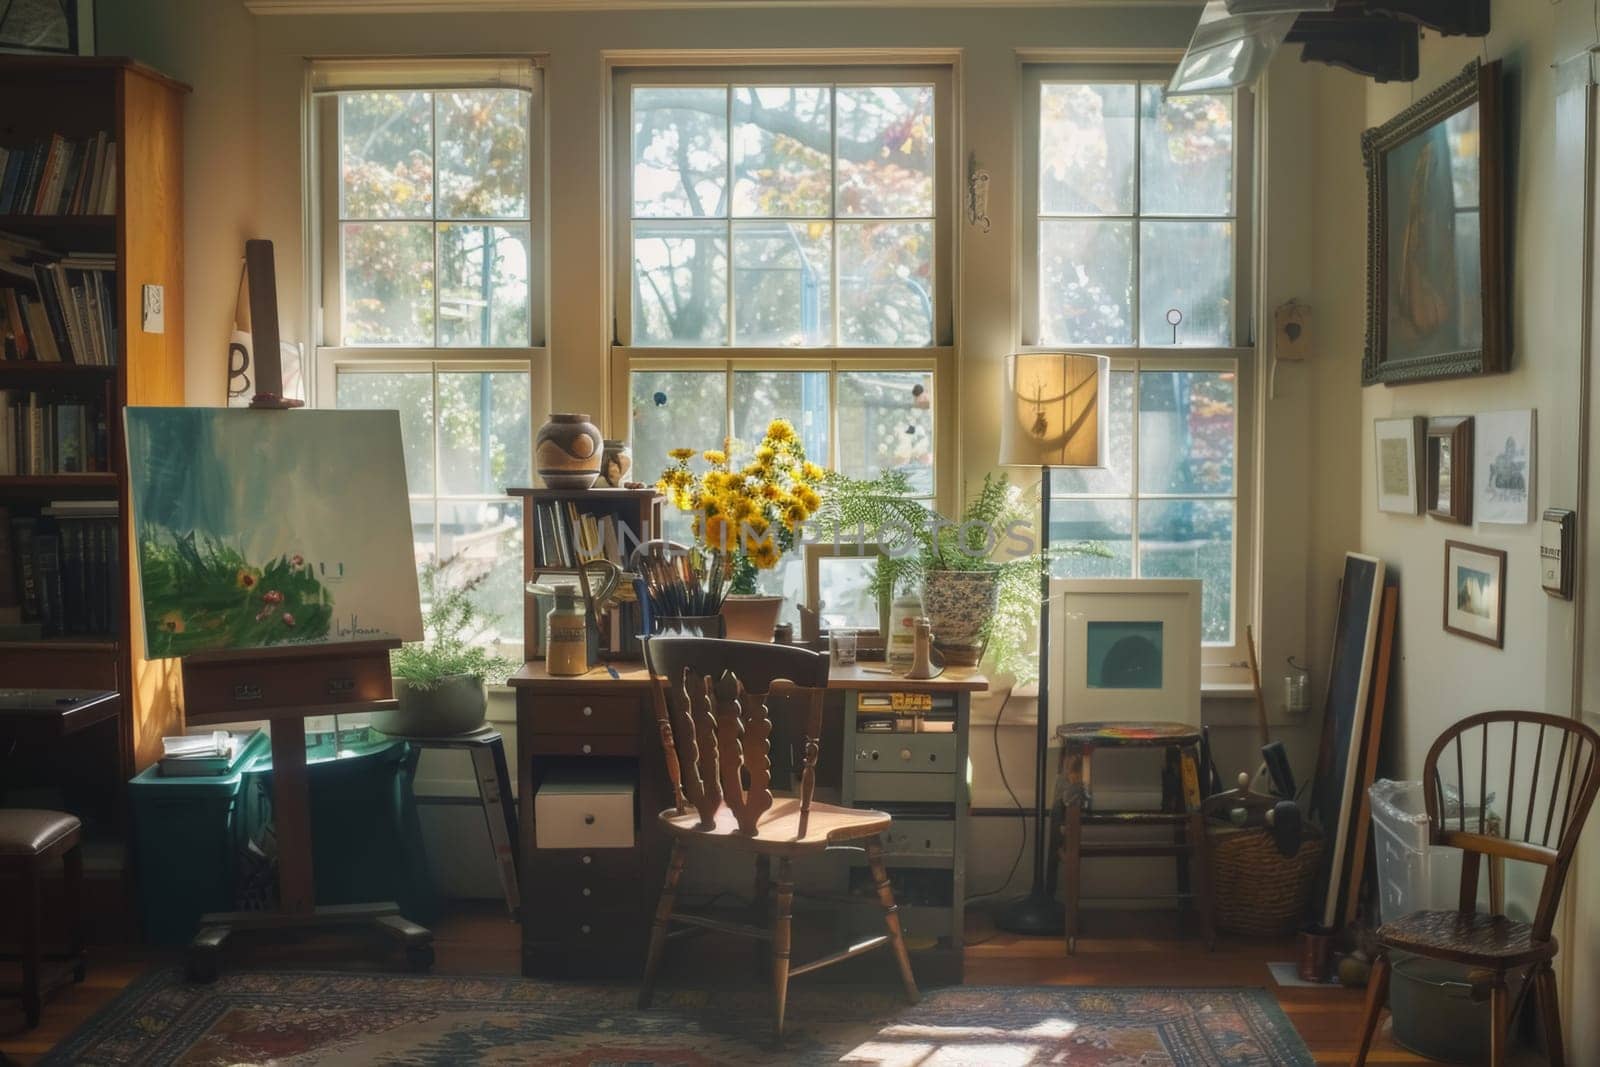 A cozy artist's home studio bathed in sunlight, with a painting in progress, surrounded by books, plants, and personal treasures that inspire creativity